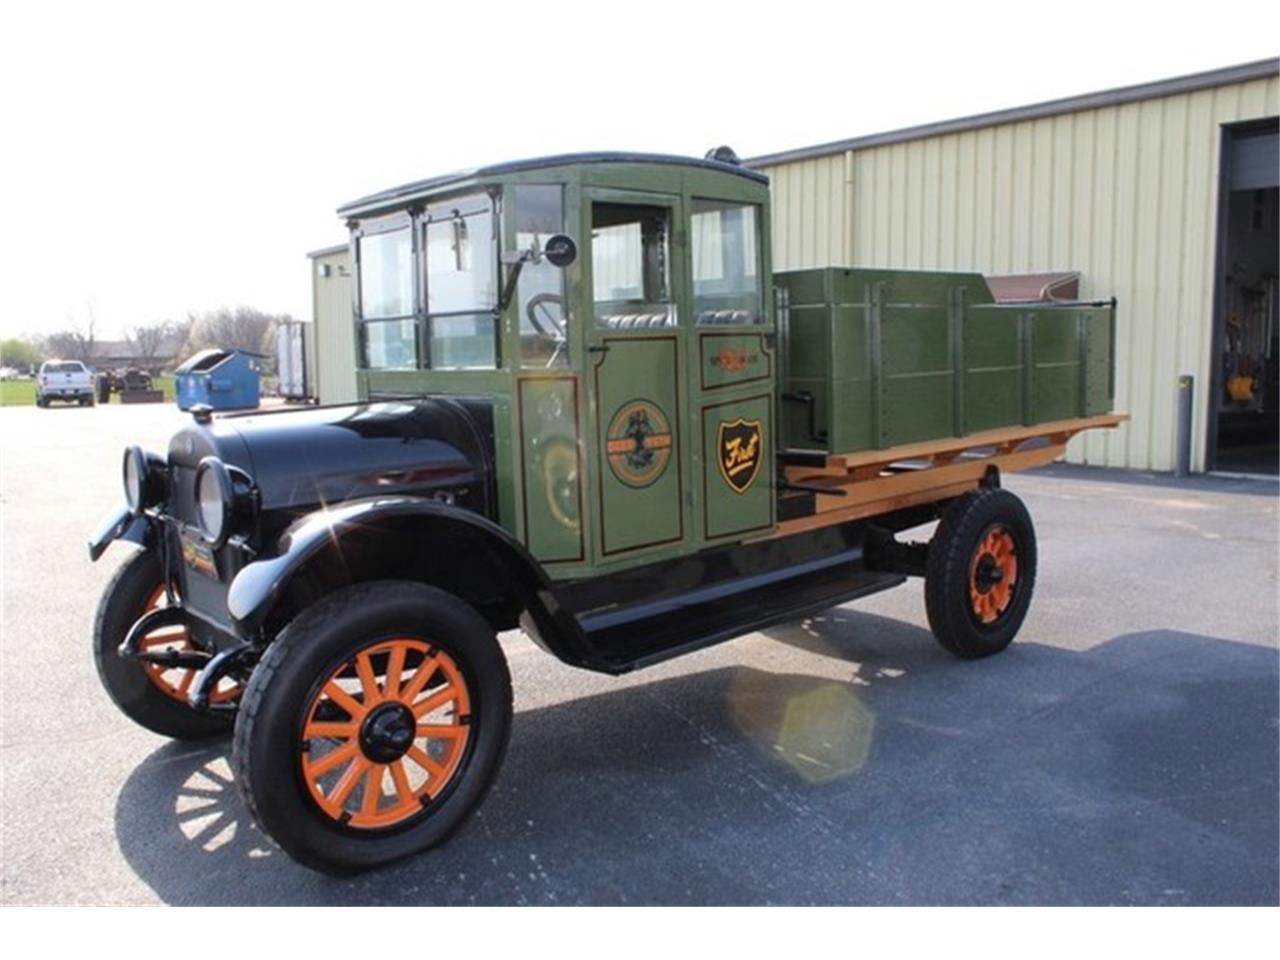 1925 REO Truck for Sale | ClassicCars.com | CC-1095841